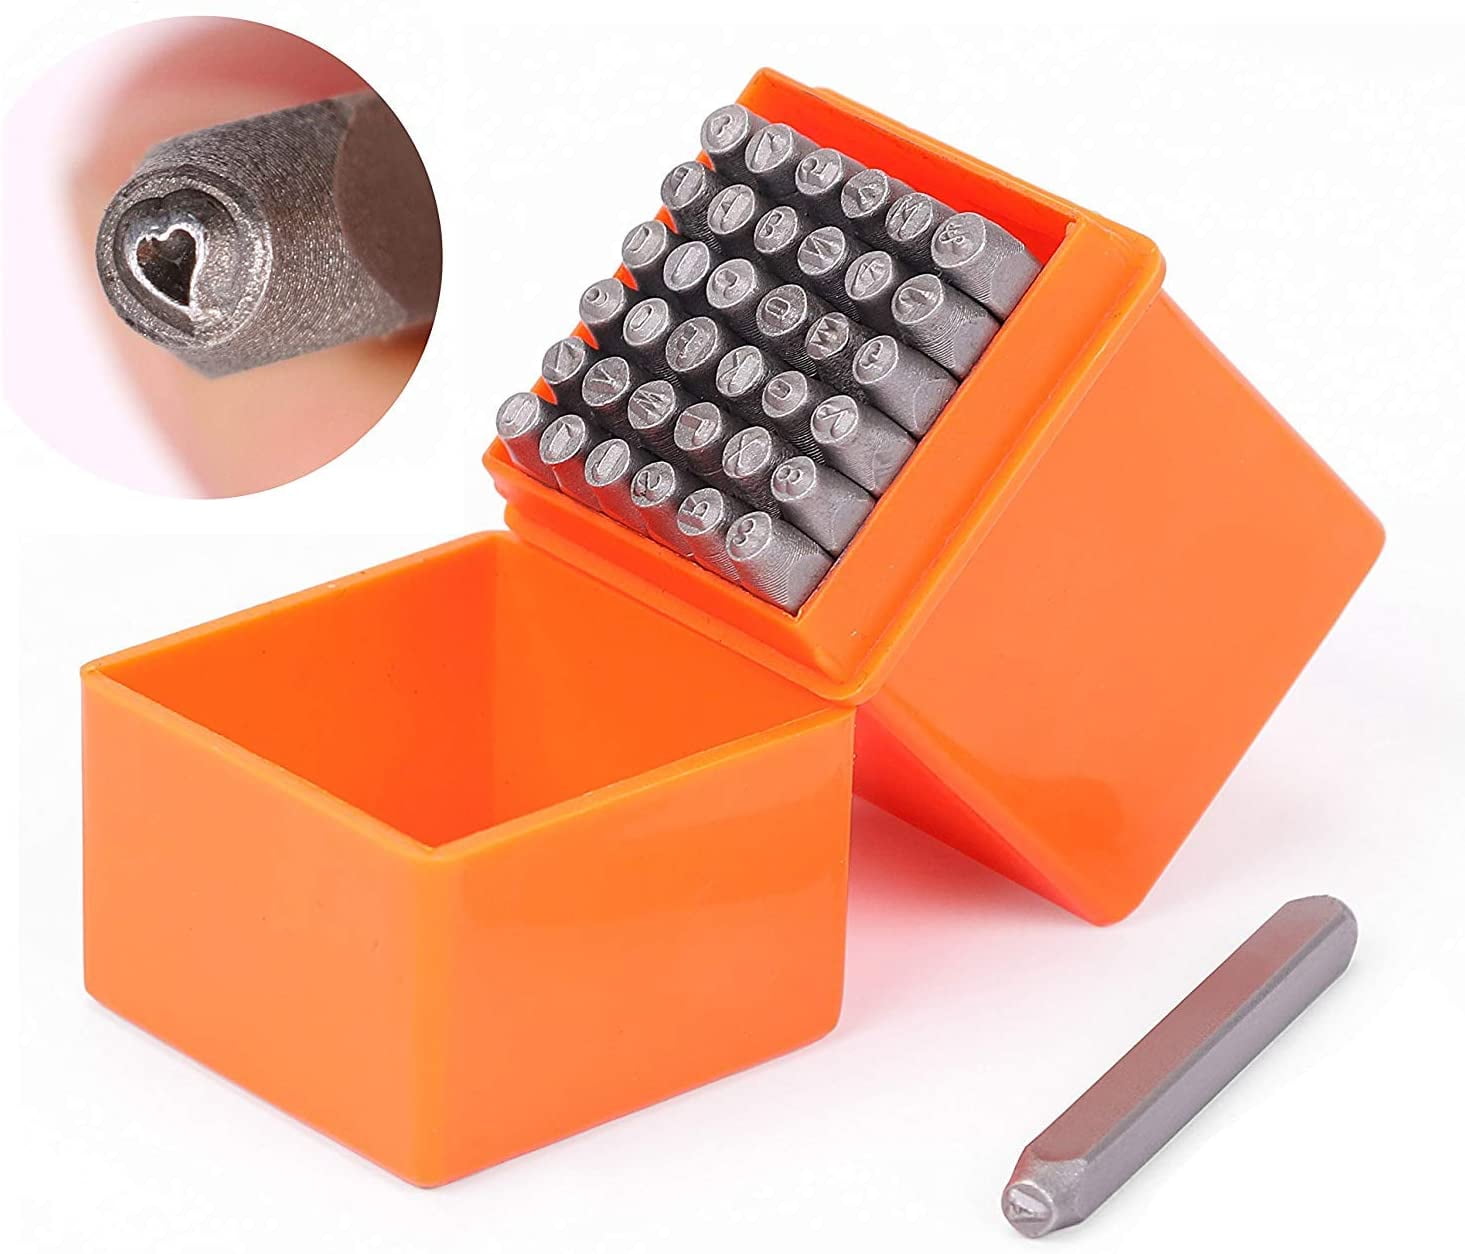 Hesroicy 36Pcs/Set Faux Leather Punching Kits Corrosion Resistance DIY Metal  Number Letter Stamping Punch Tools for Home 